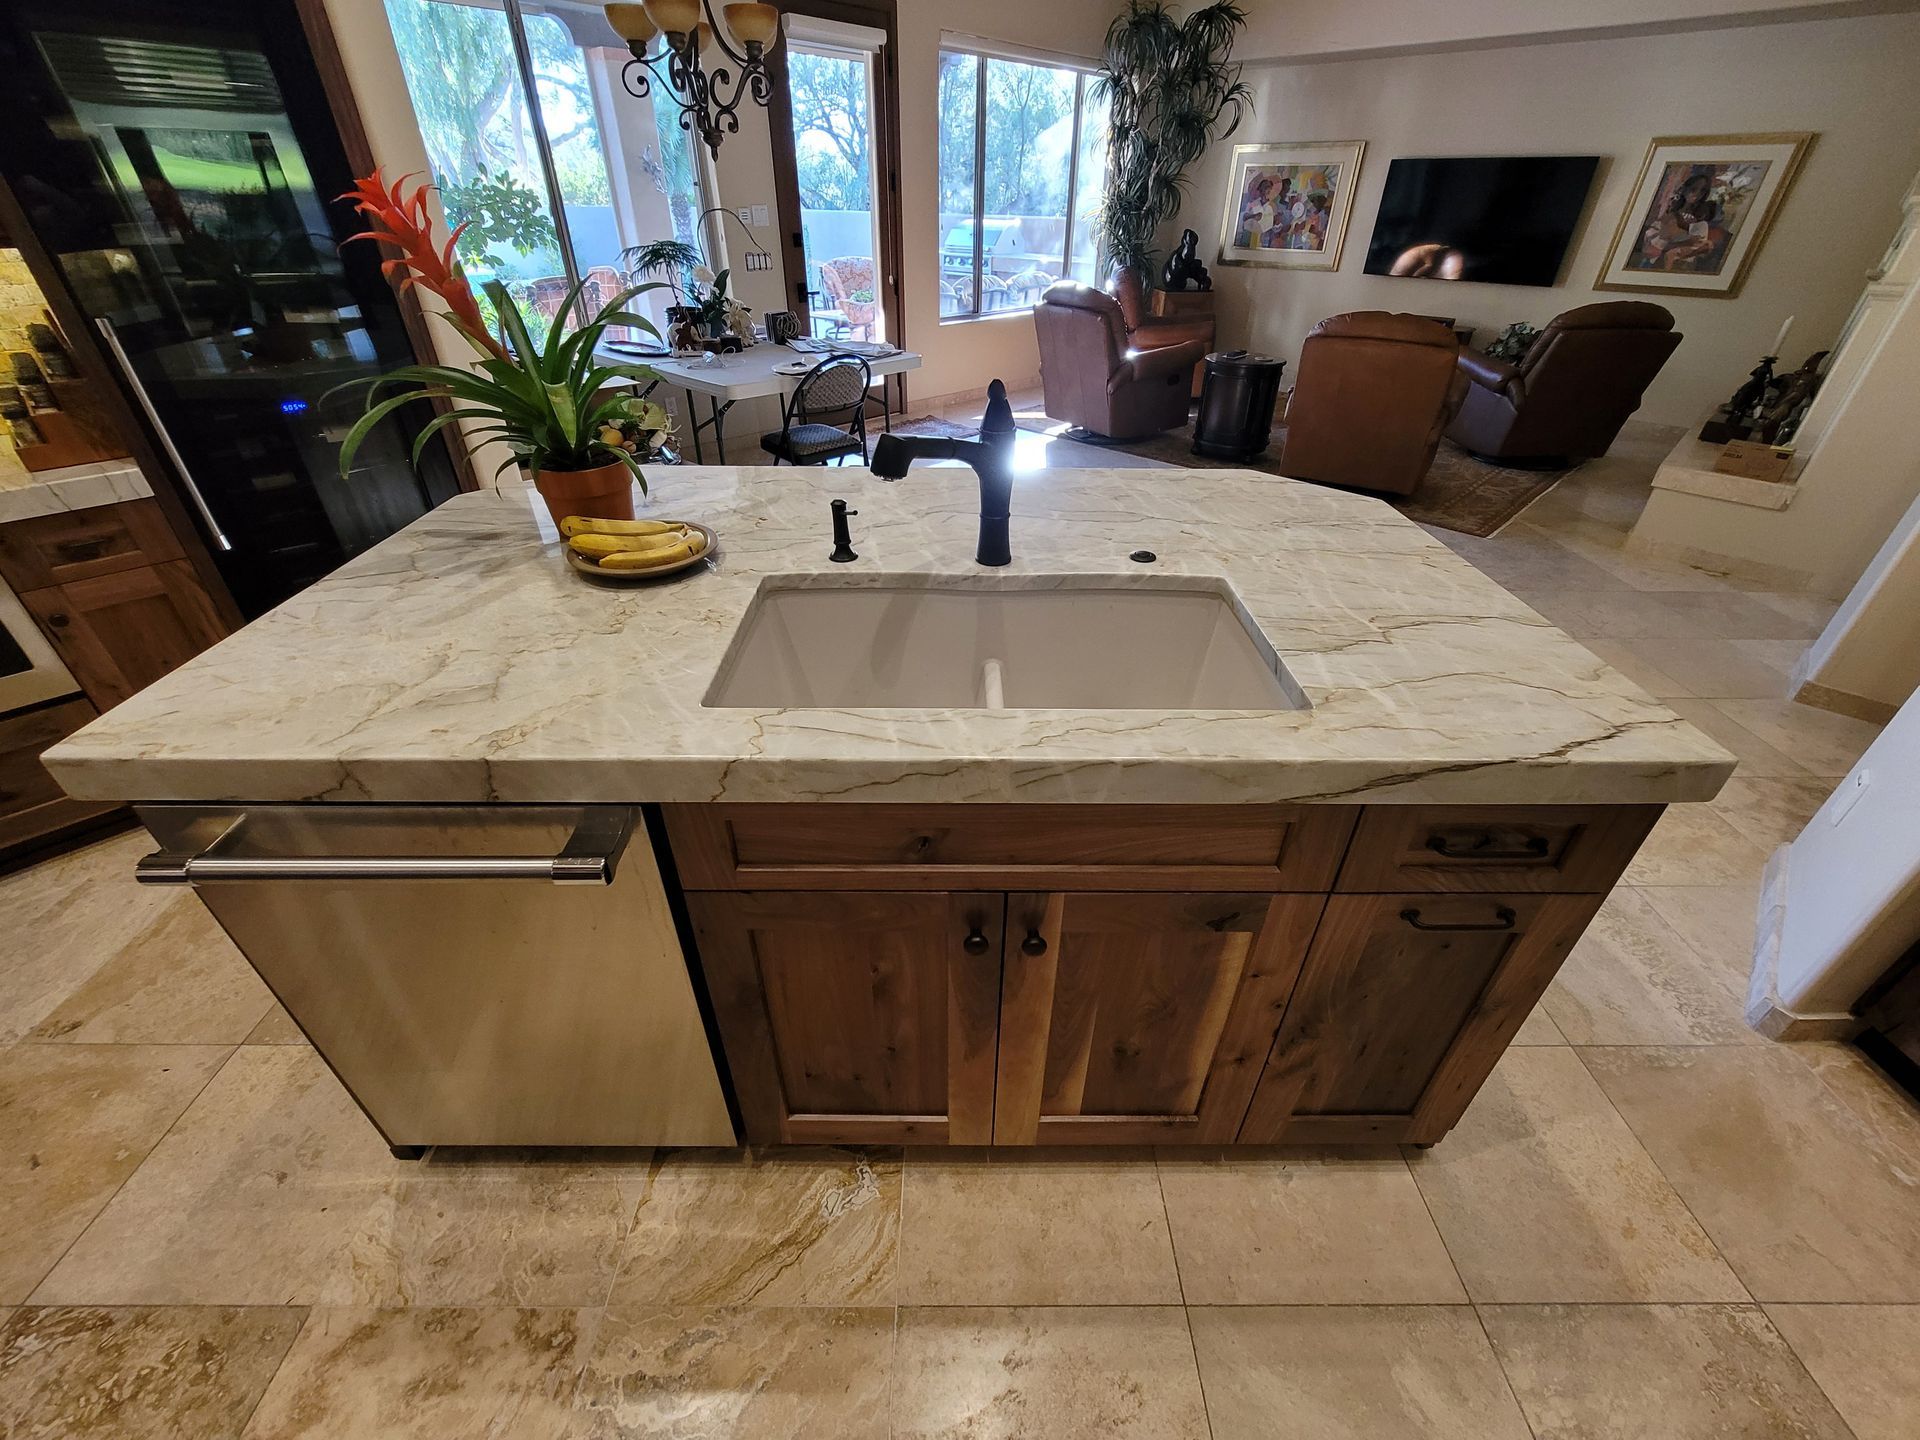 Modern kitchen remodel in [Tucson, AZ] featuring cabinets, waterfall quartz countertops with gold veins, stainless steel appliances ( pot filler faucet, refrigerator, wood accent breakfast bar.